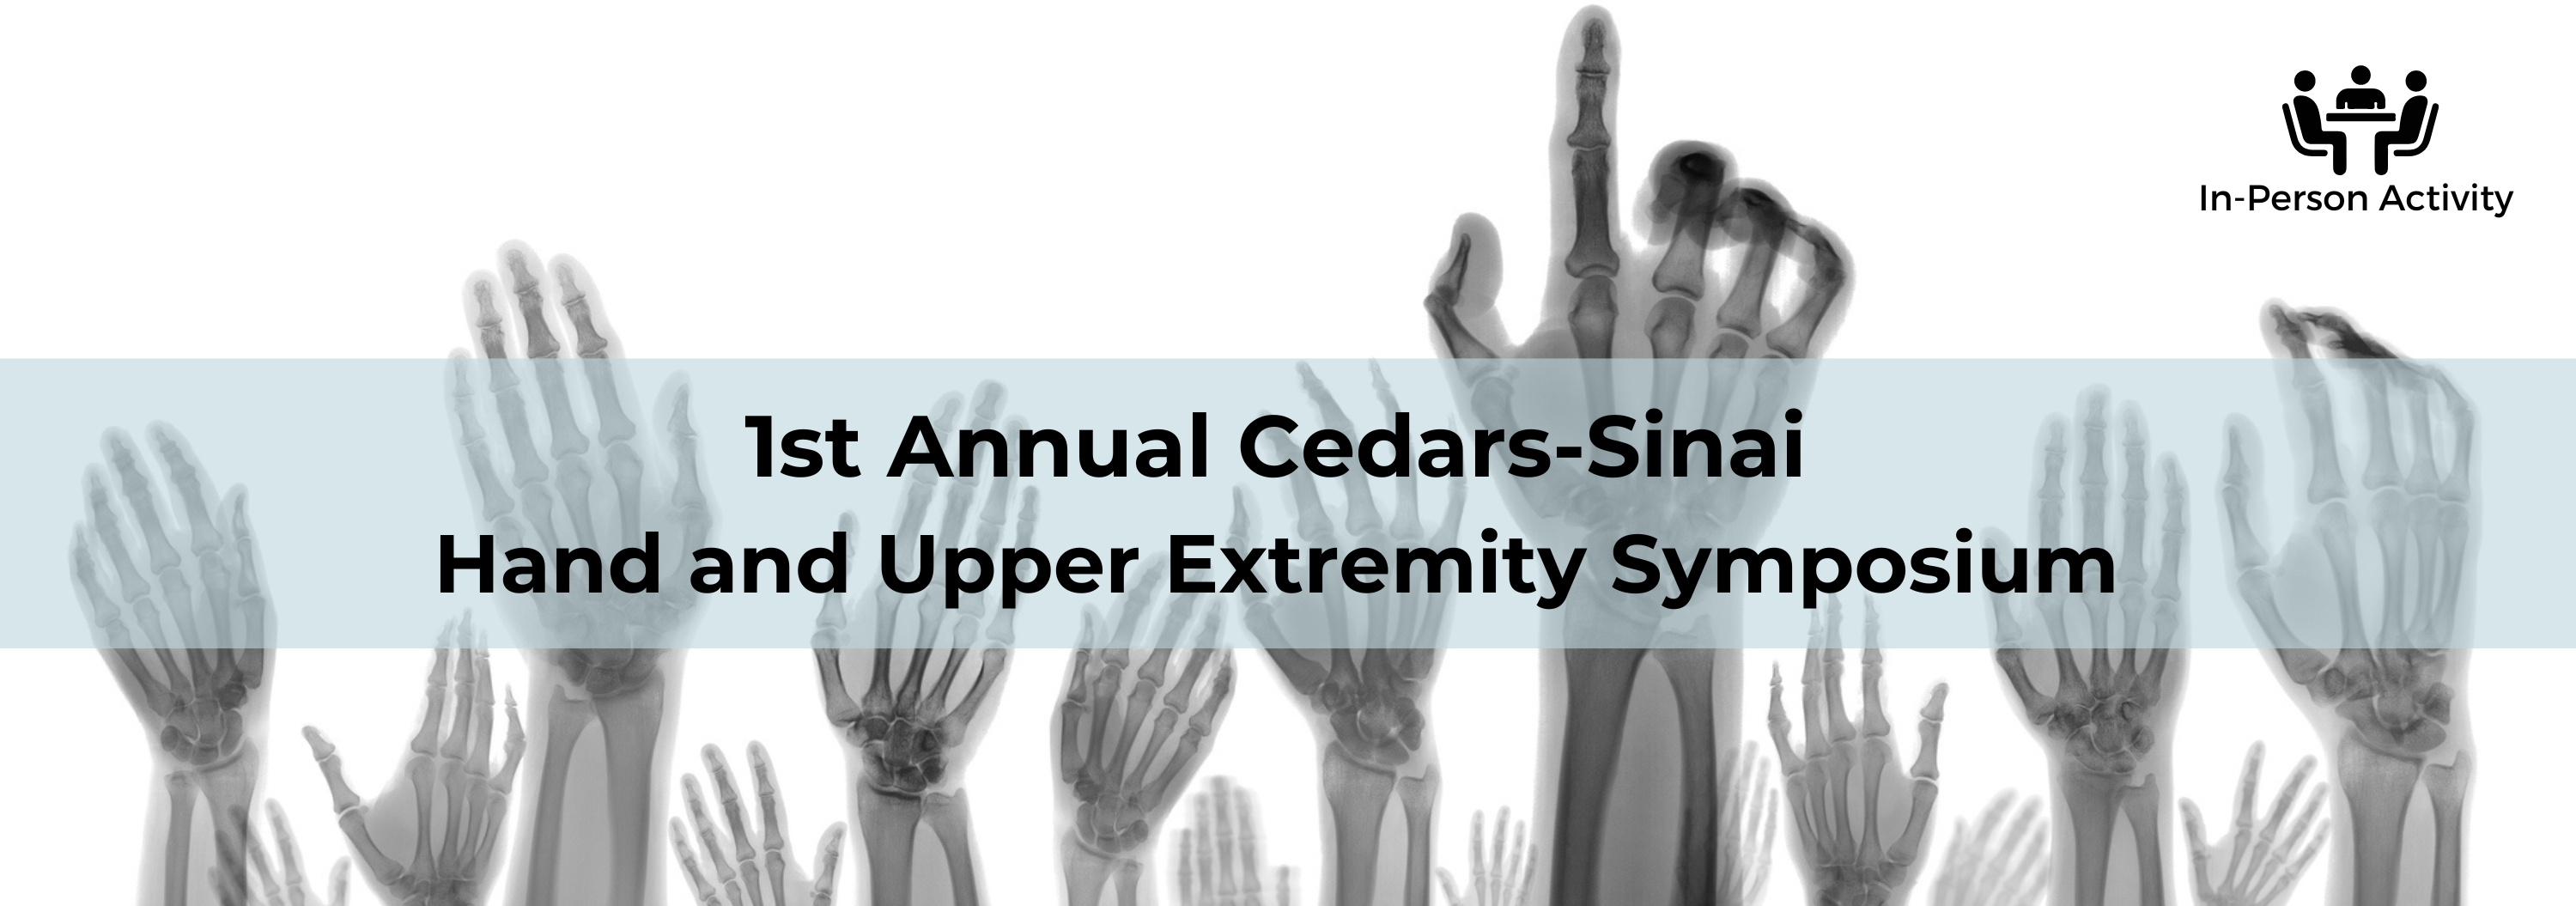 1st Annual Cedars-Sinai Hand and Upper Extremity Symposium Banner